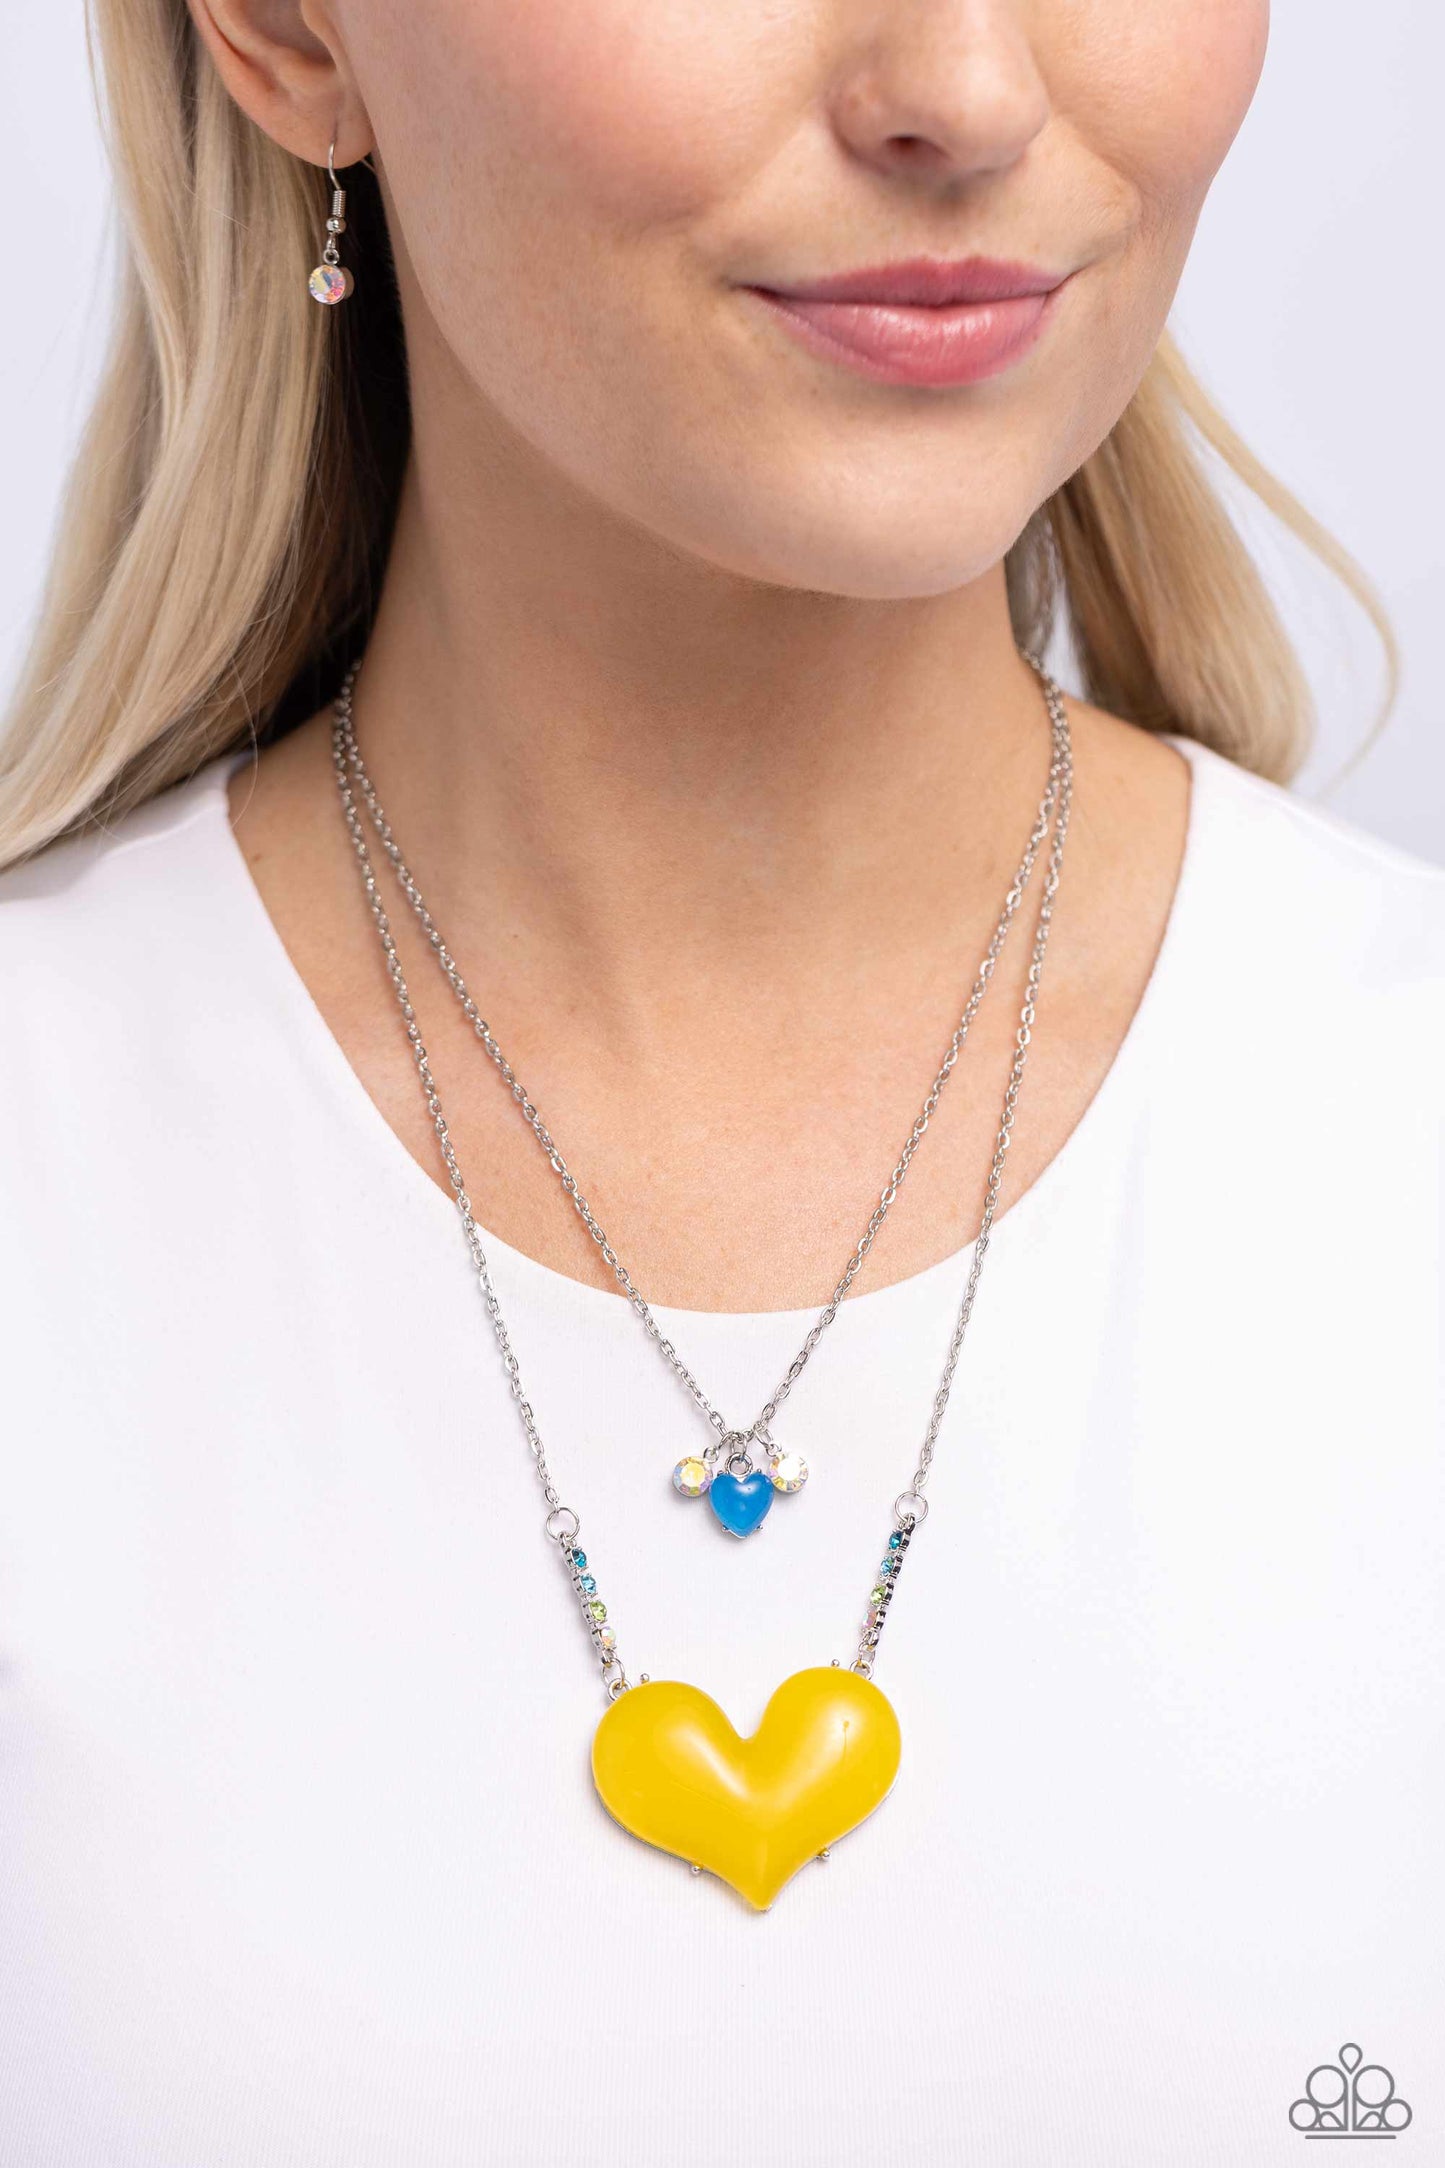 Paparazzi Necklaces - Heart-Racing Recognition - Yellow